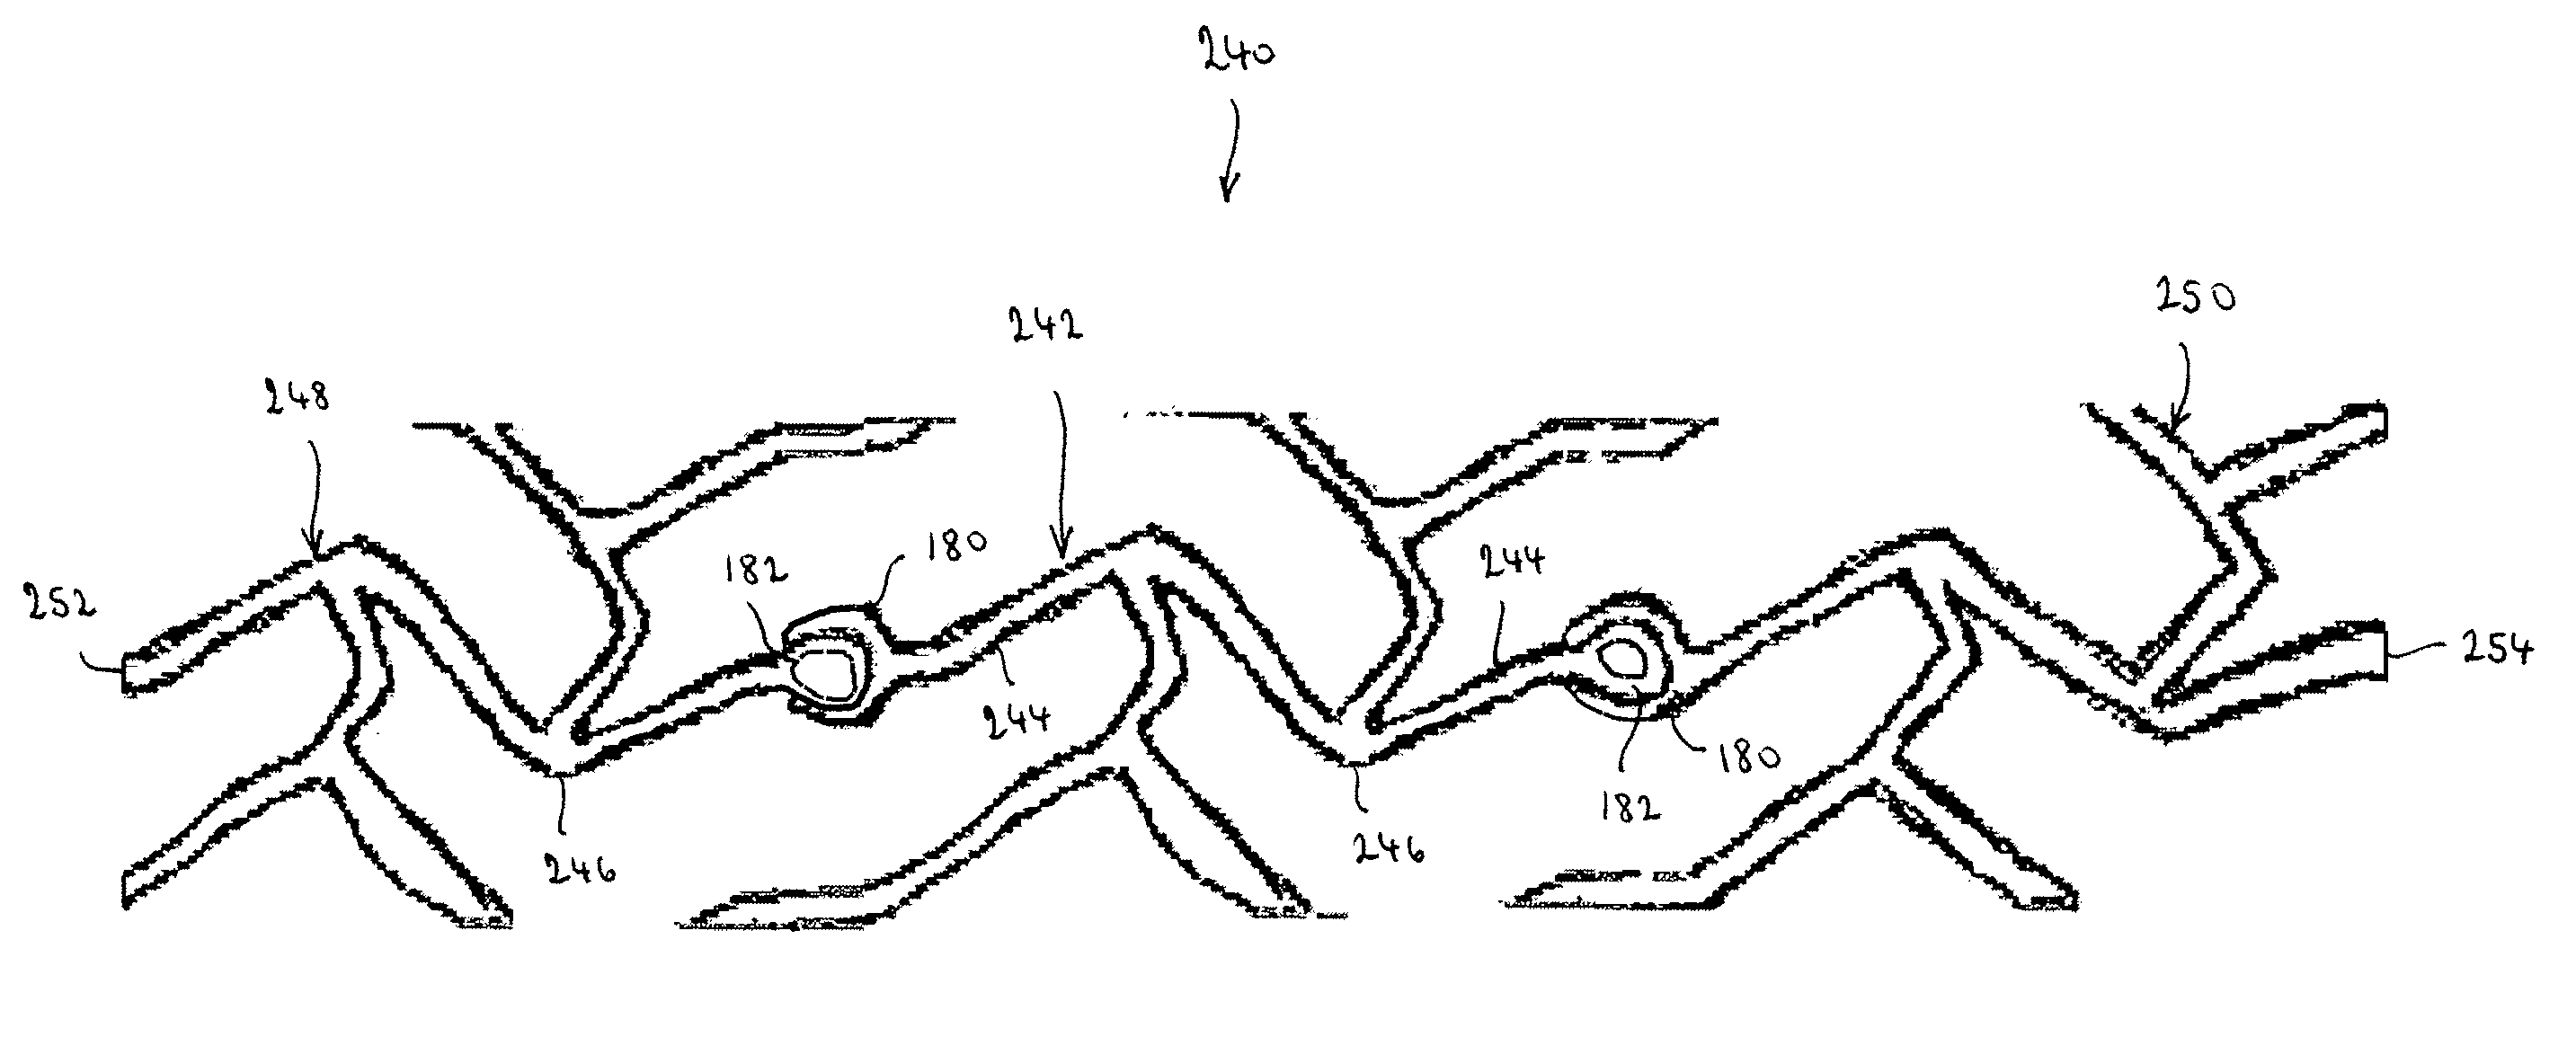 Modular vascular prosthesis and methods of use